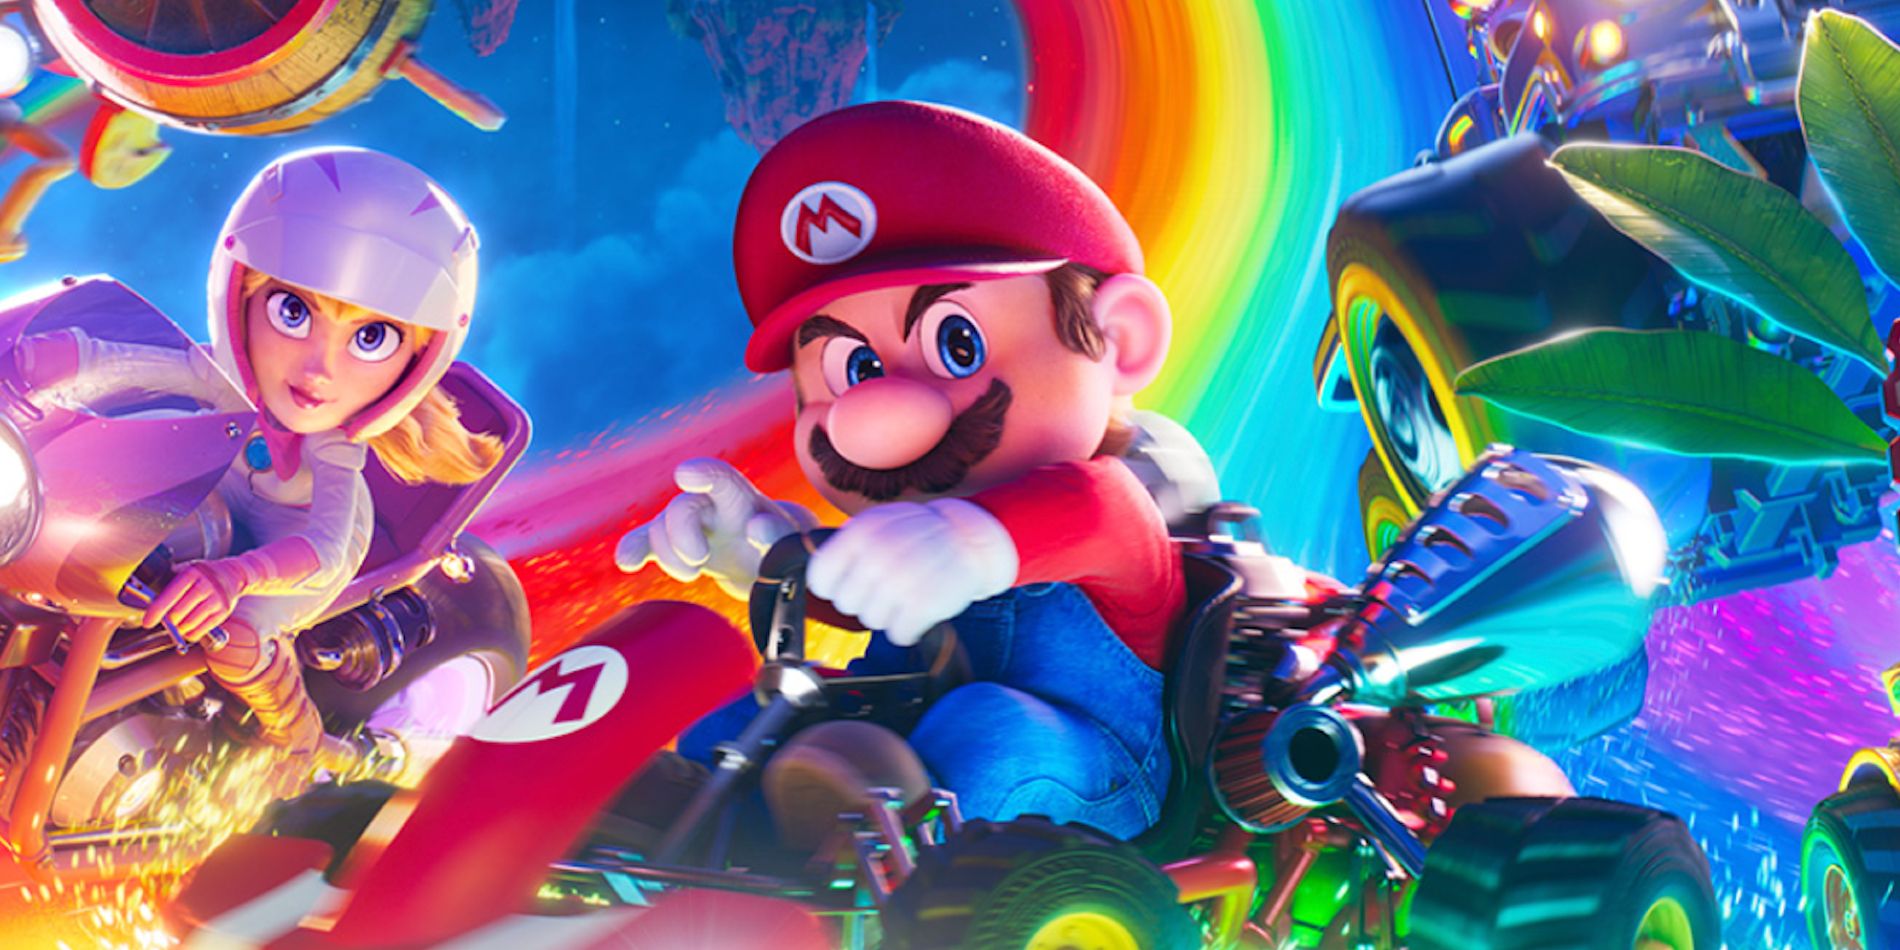 The Super Mario Bros. movie poster shows  Mario Kart with Peach, Mario, and others racing down a rainbow road